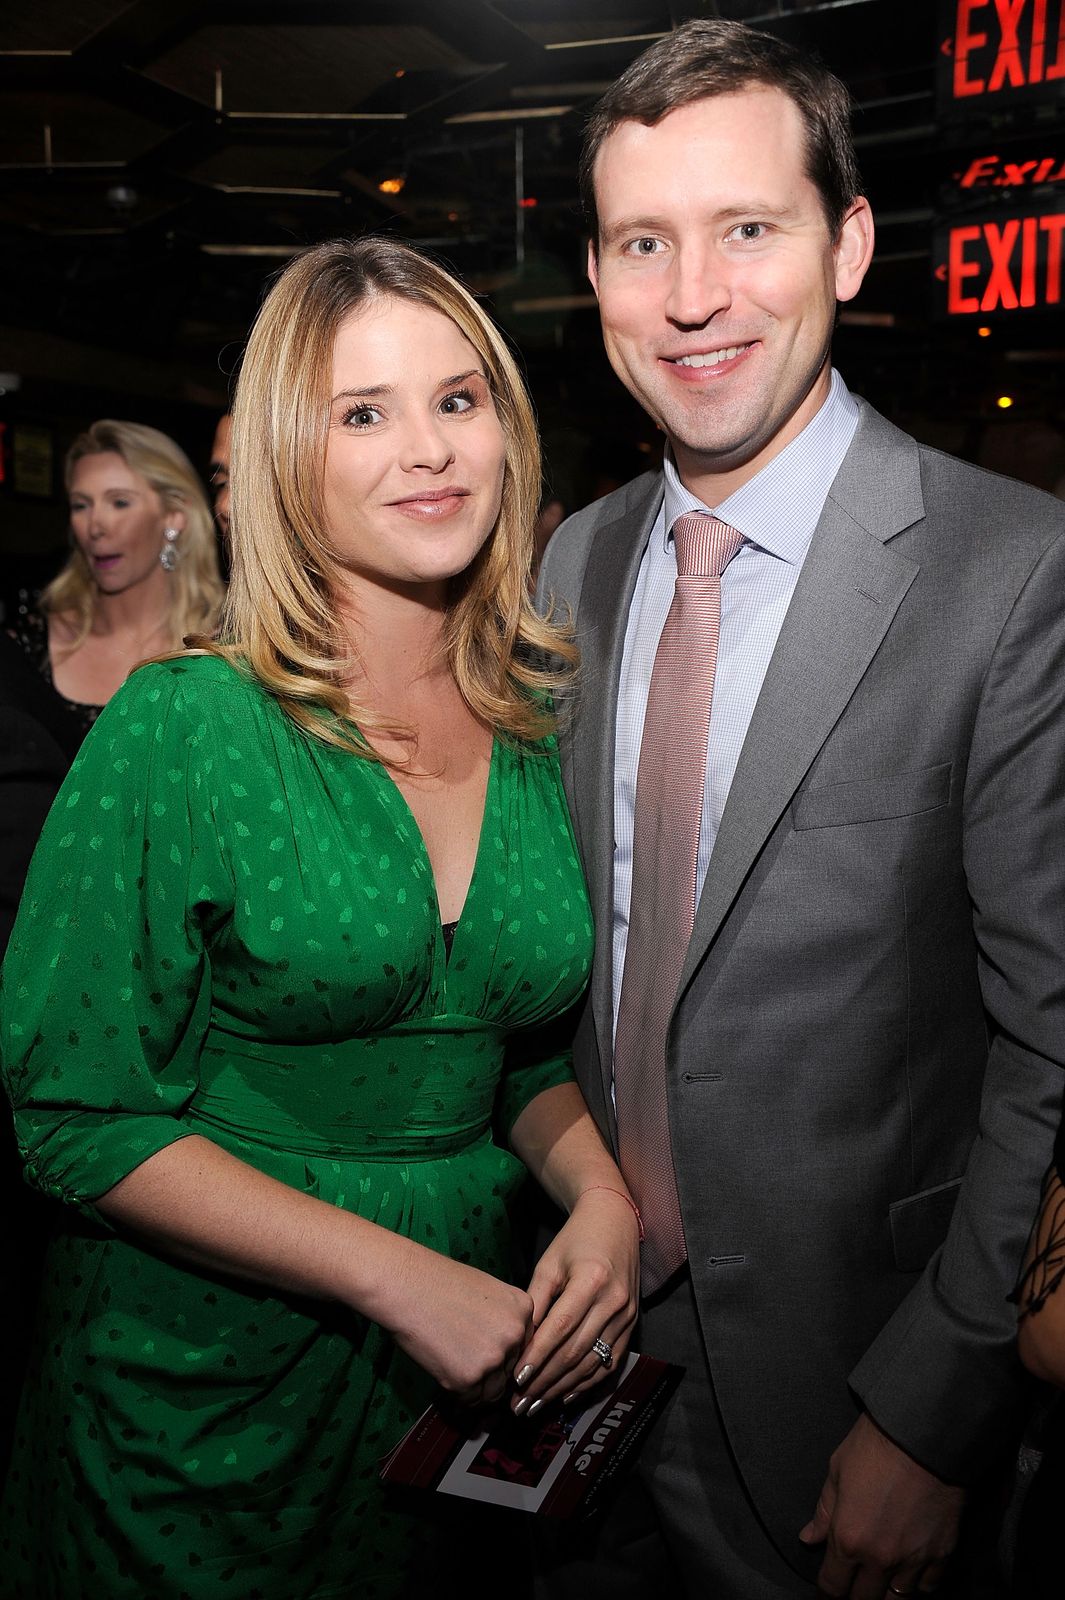 Jenna Bush Hager and Henry Chase Hager at "A Candid Conversation with Jane Fonda and Andy Cohen" on October 11, 2012, in New York City | Photo: Gary Gershoff/WireImage/Getty Images